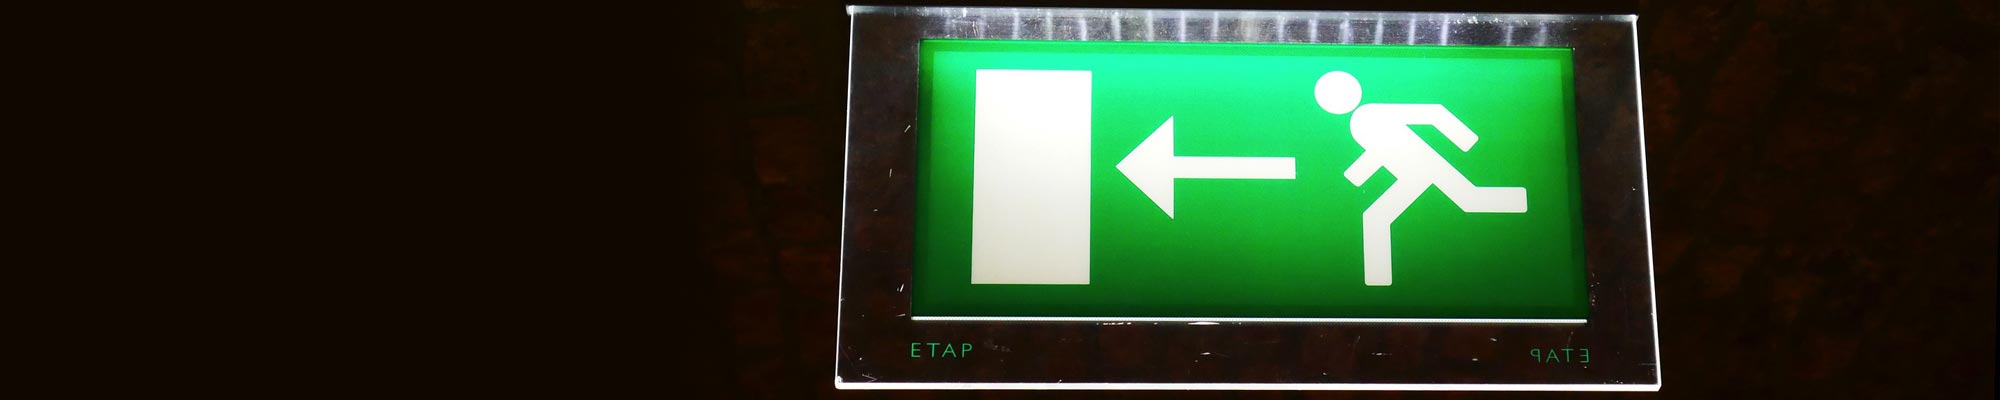 Emergency Lighting - Electricians in Reading